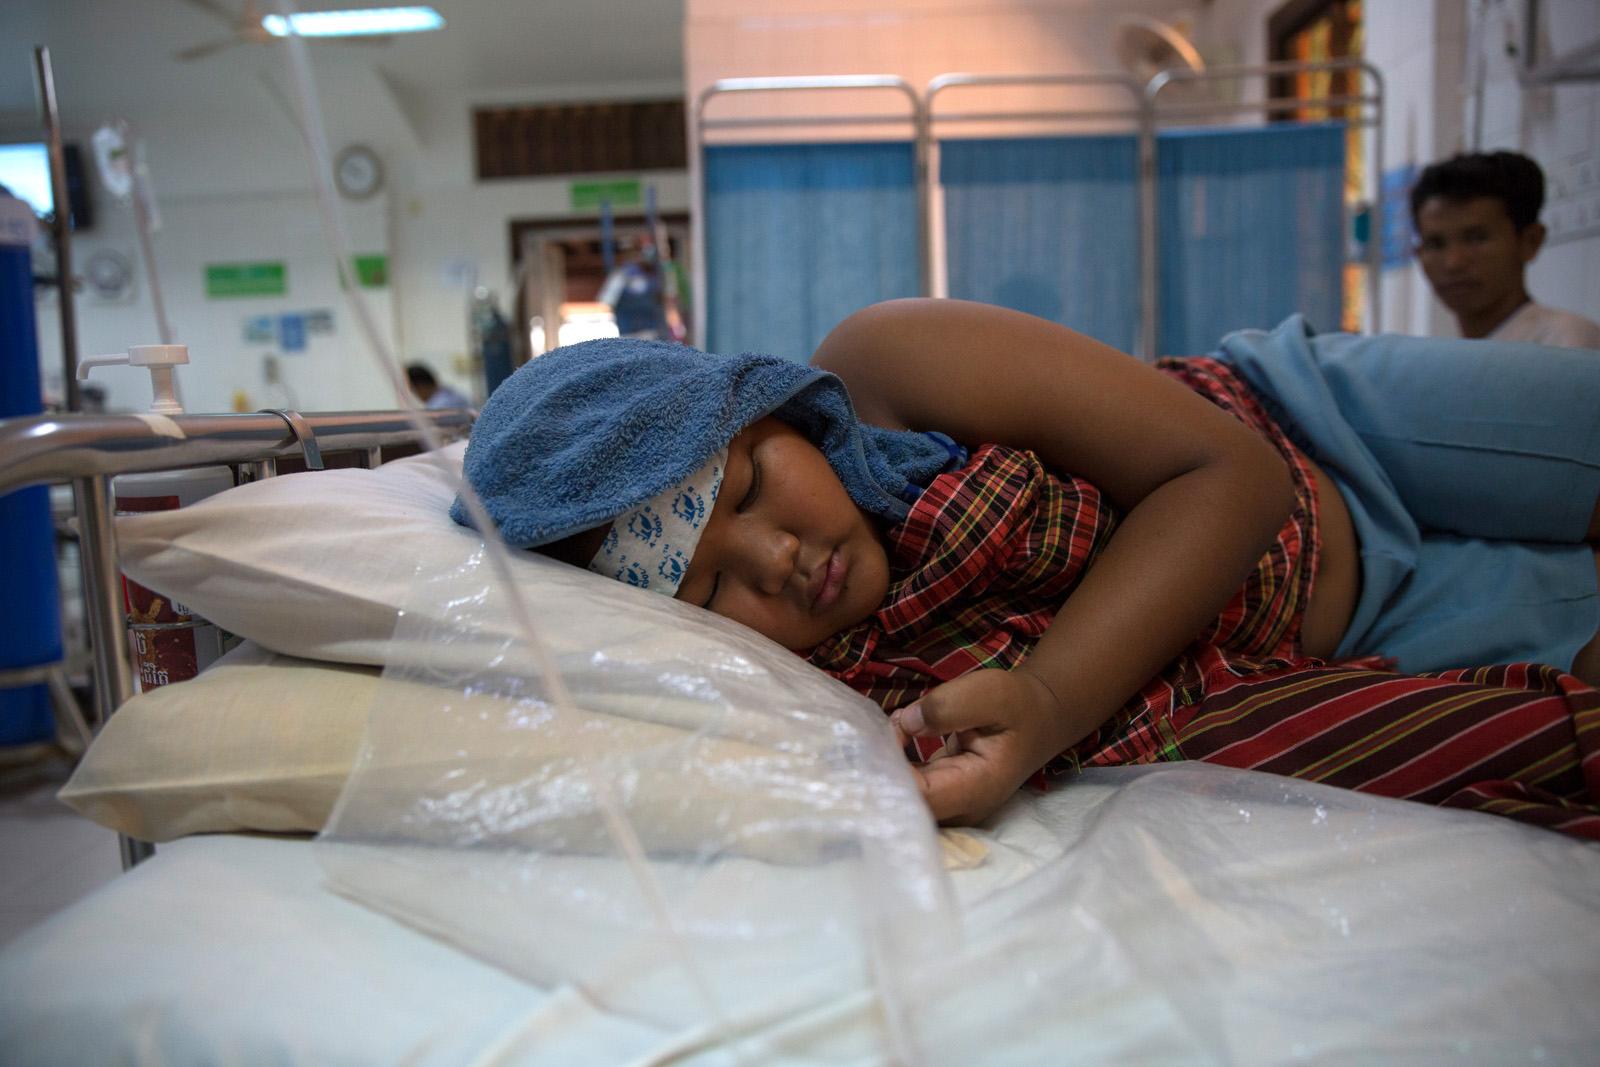 SOUTHEAST ASIA'S DENGUE EPIDEMIC - Chan Pheakdey, 10, lies in bed a hospital bed in the...